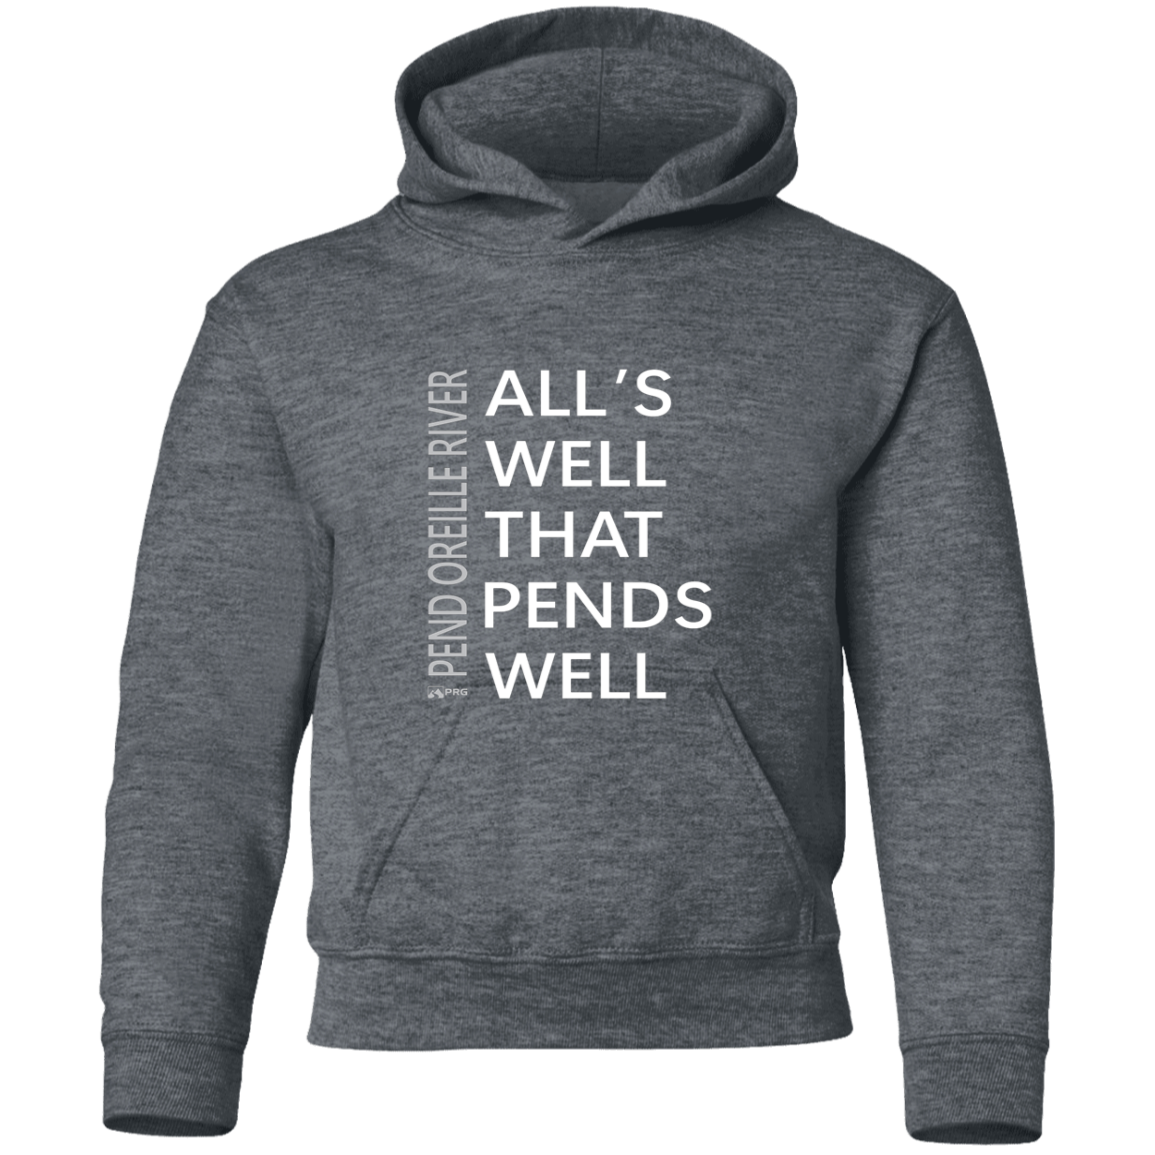 All's Well - Youth Hoodie